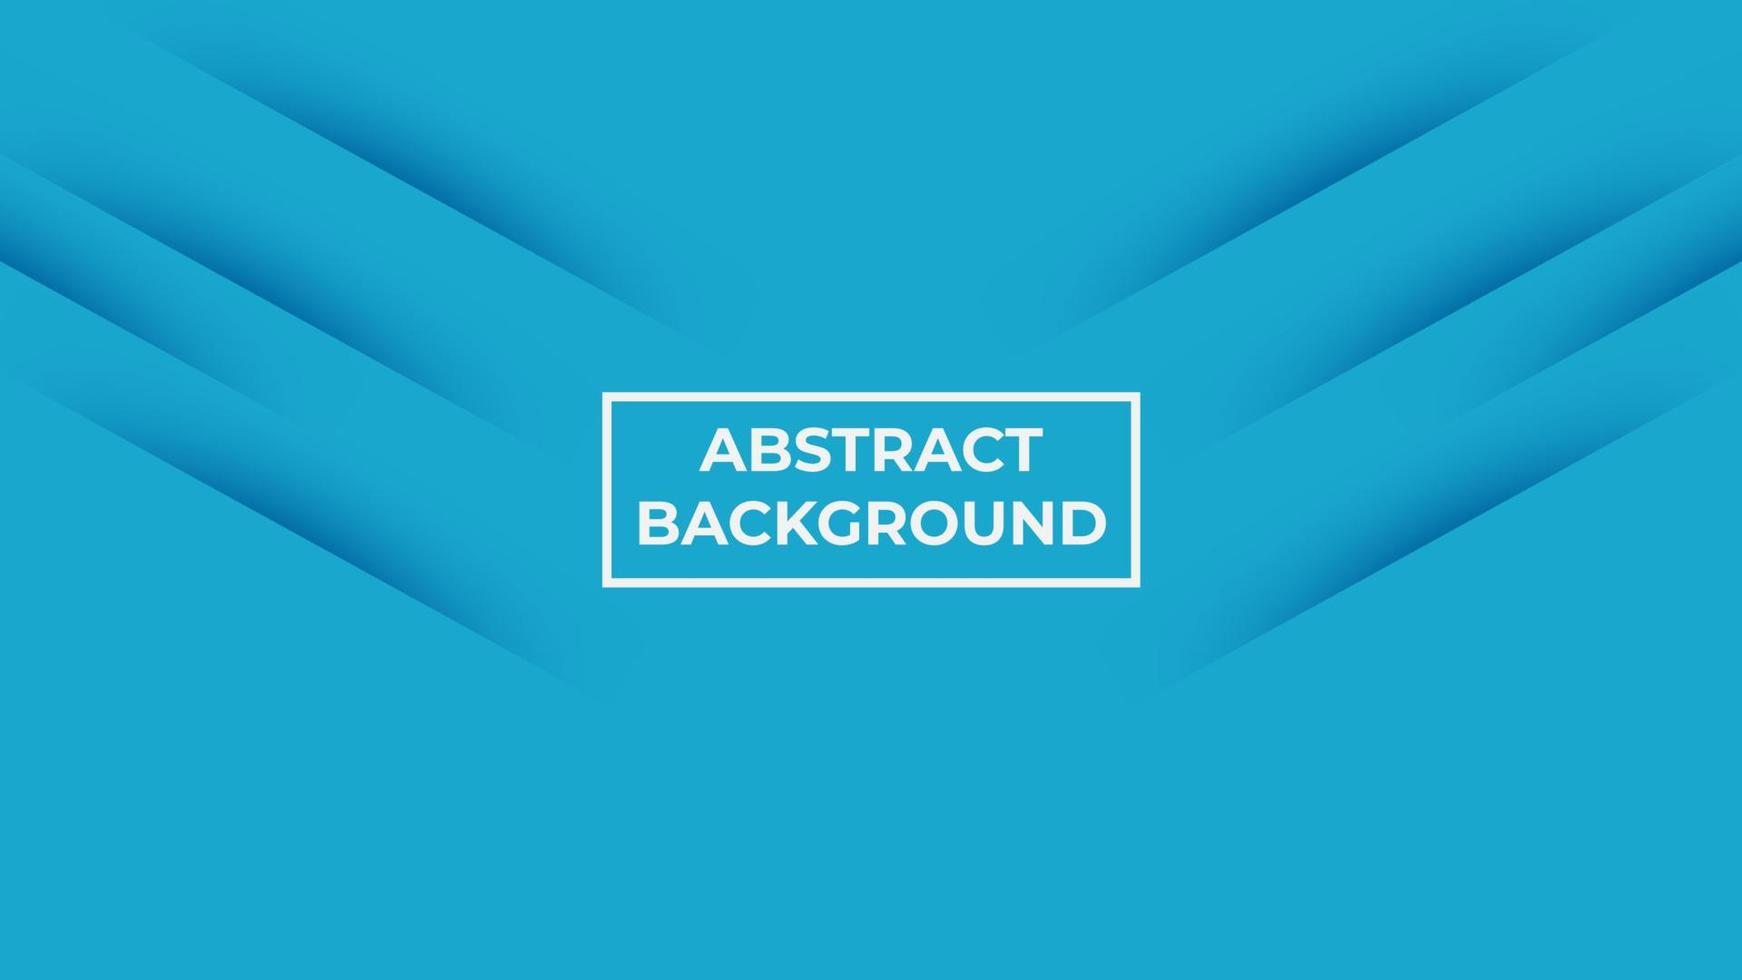 Abstract background. easy to edit vector